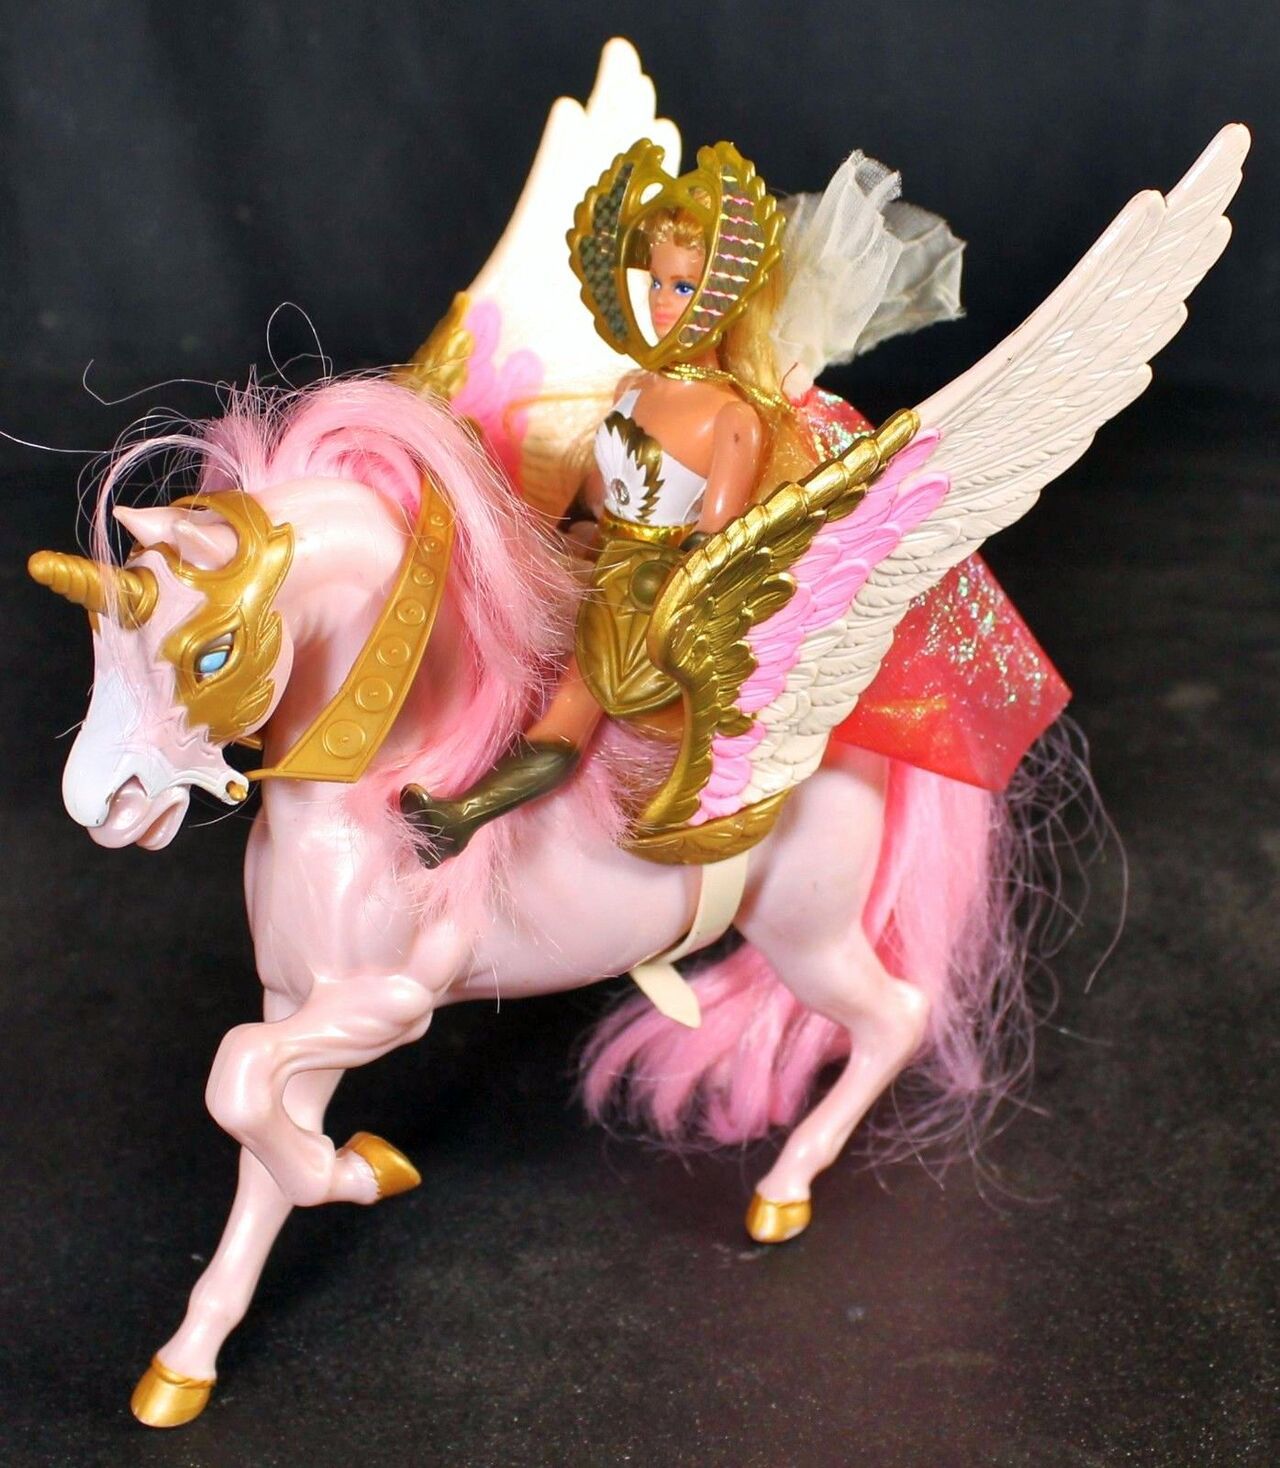 She-Ra: Princess of Power (1985) - (figures, dolls, toys and objects) 3